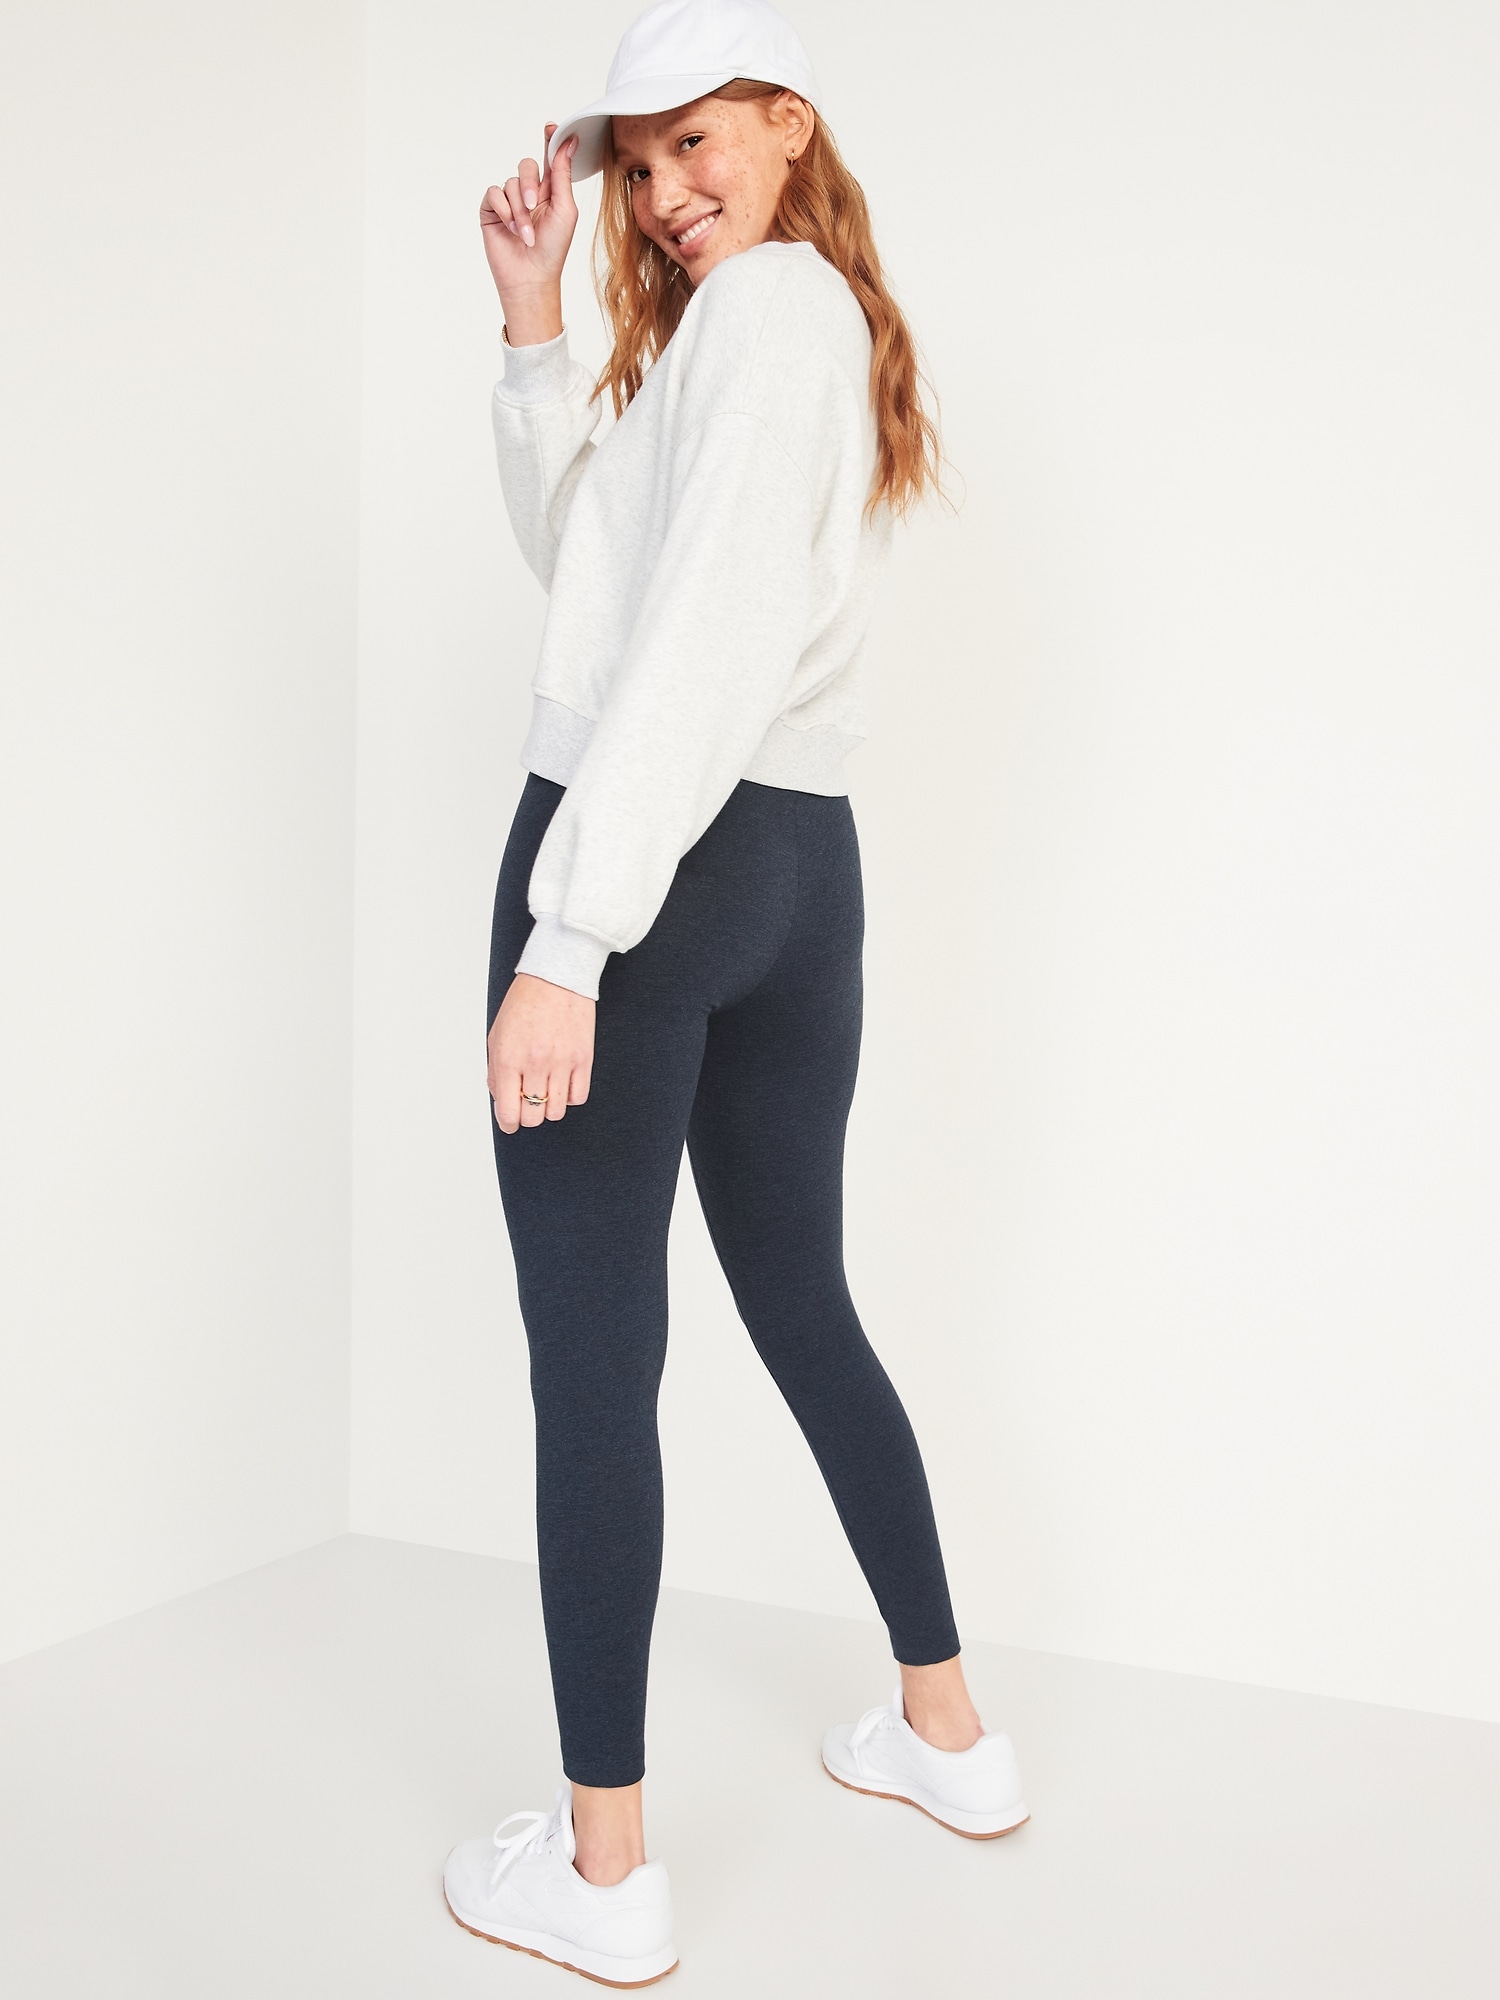 Ardene Super Soft Leggings with Side Pocket in Black | Size Small |  Polyester/Spandex